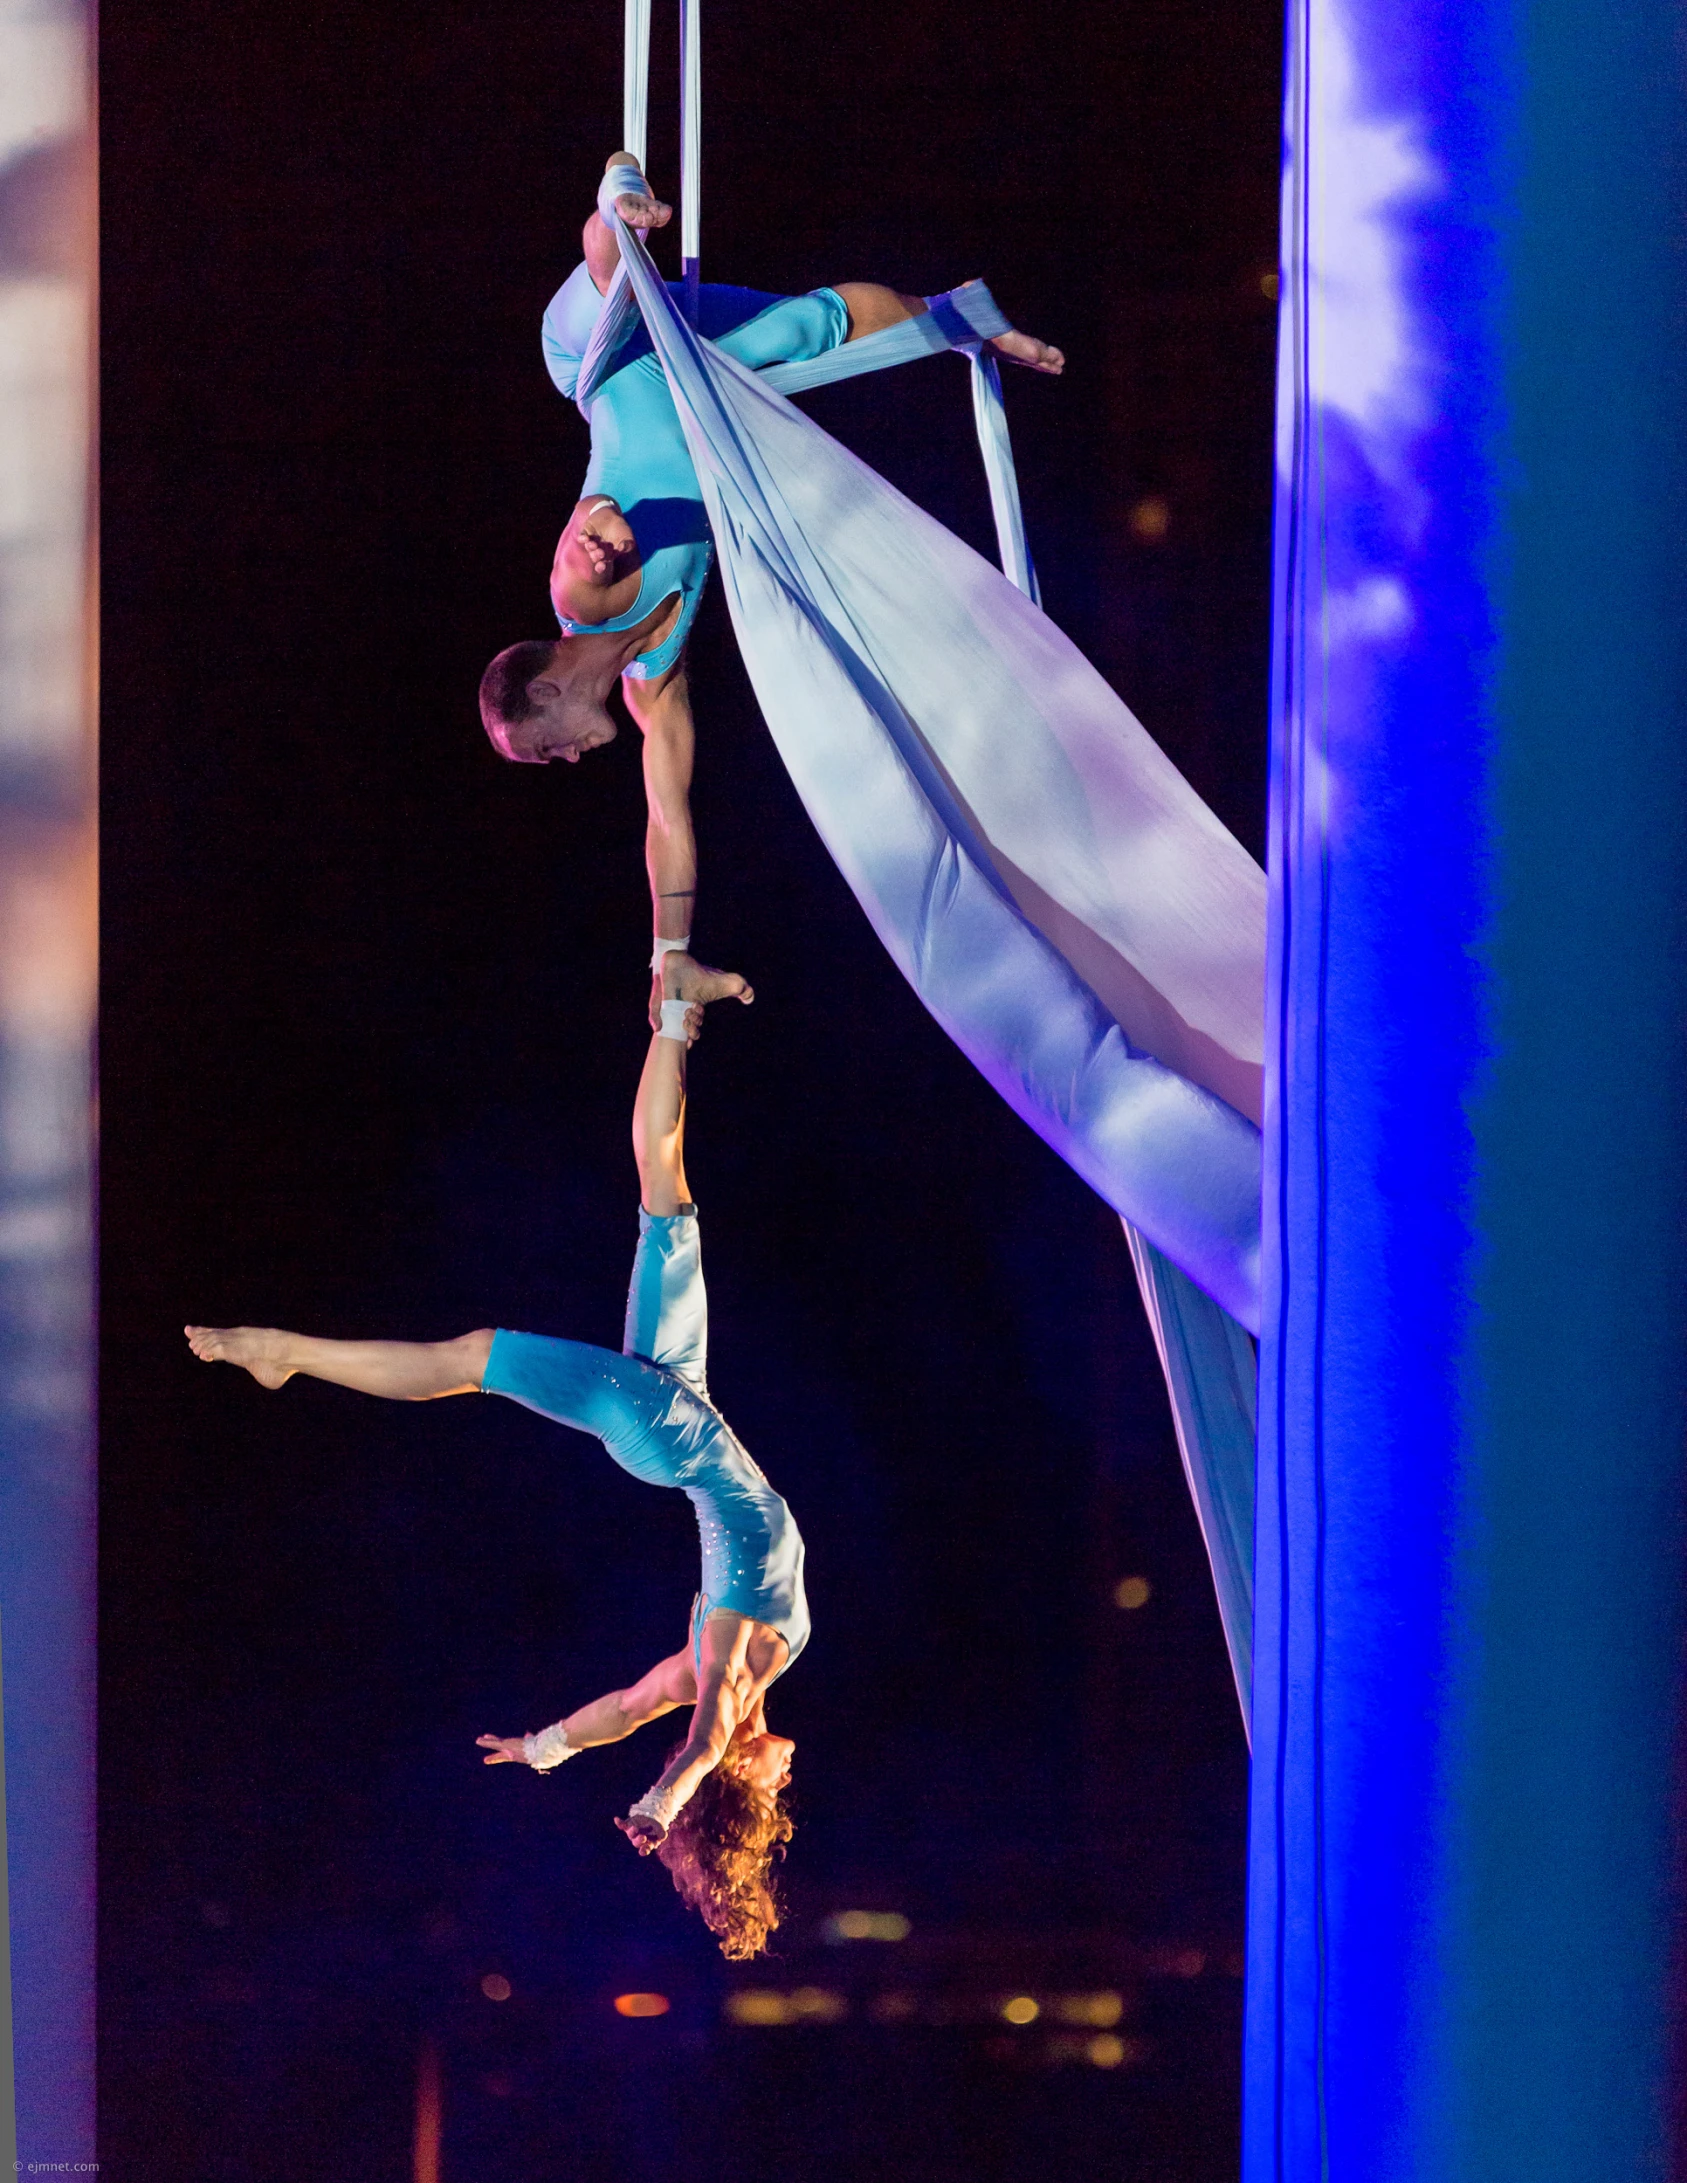 two aerial performers are doing acrobatic tricks